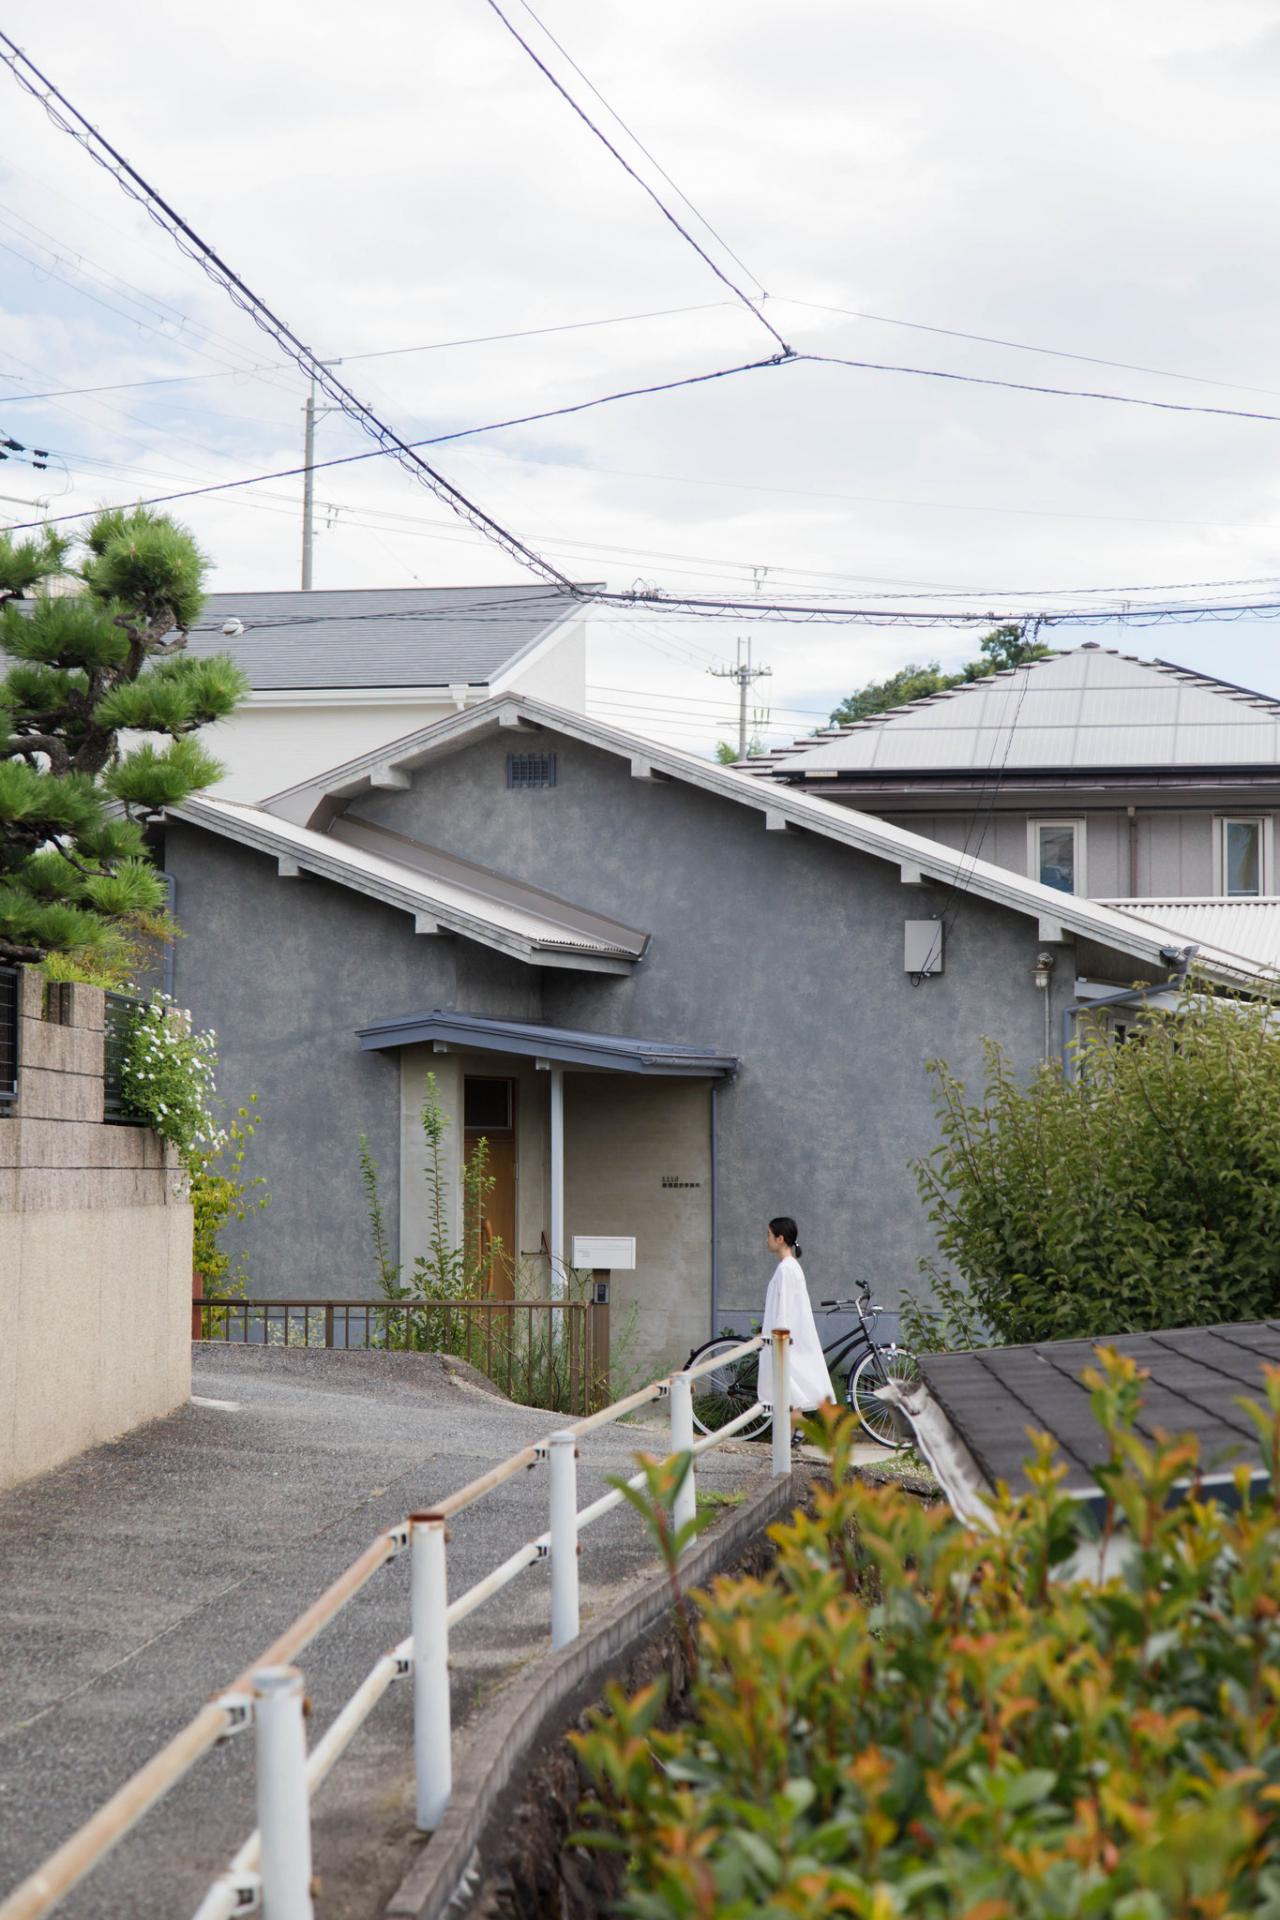 The Charming Makeover of a 45-Year-Old Japanese House